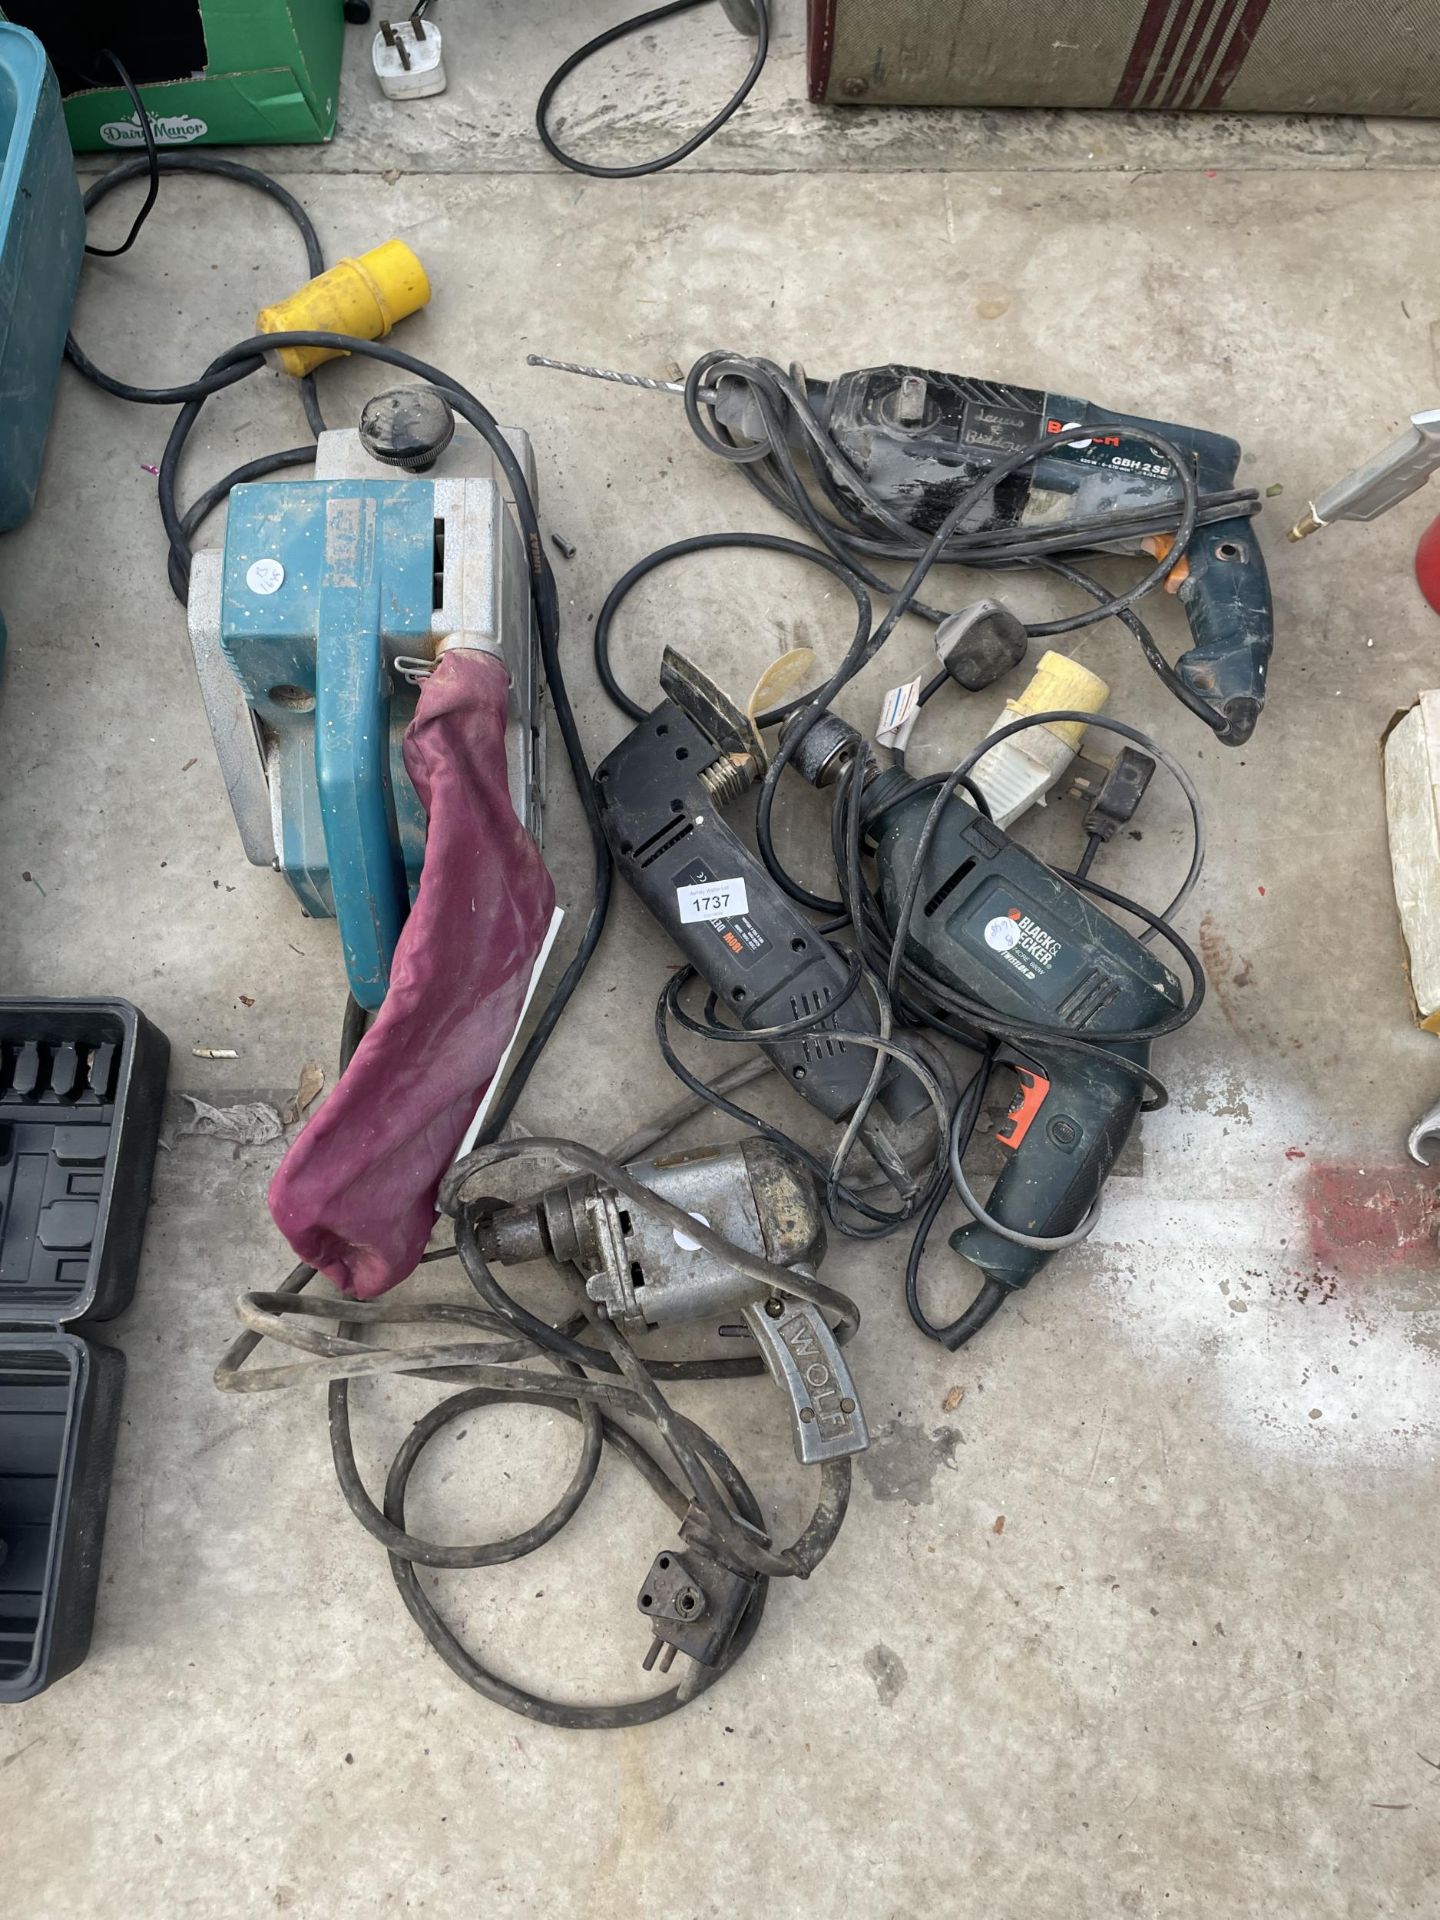 AN ASSORTMENT OF POWER TOOLS TO INCLUDE A BLACK AND DECKER DETAIL SANDER, THREE DRILLS AND A 110V